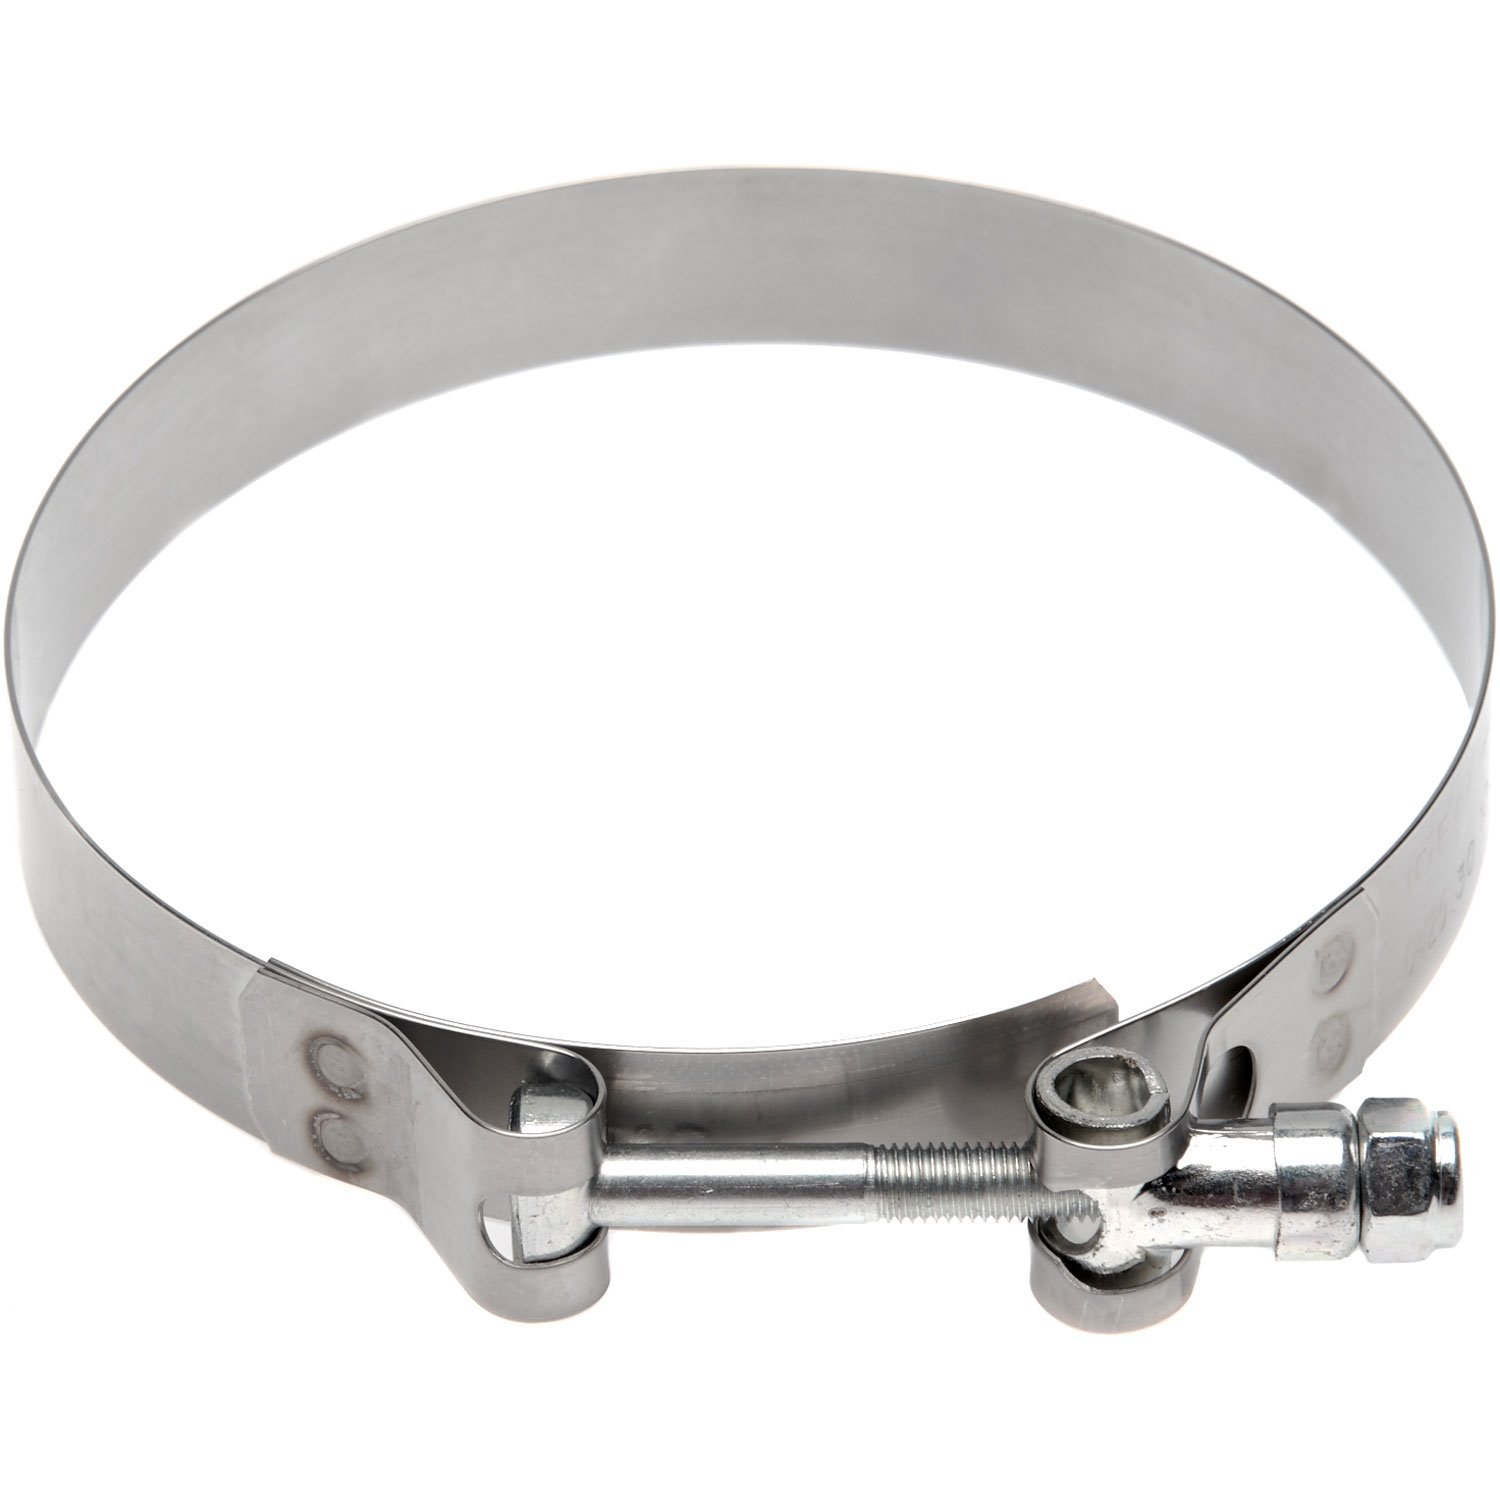 T-Bolt Hose Clamp [4.563 in. to 4.250 in. Outside Diameter]